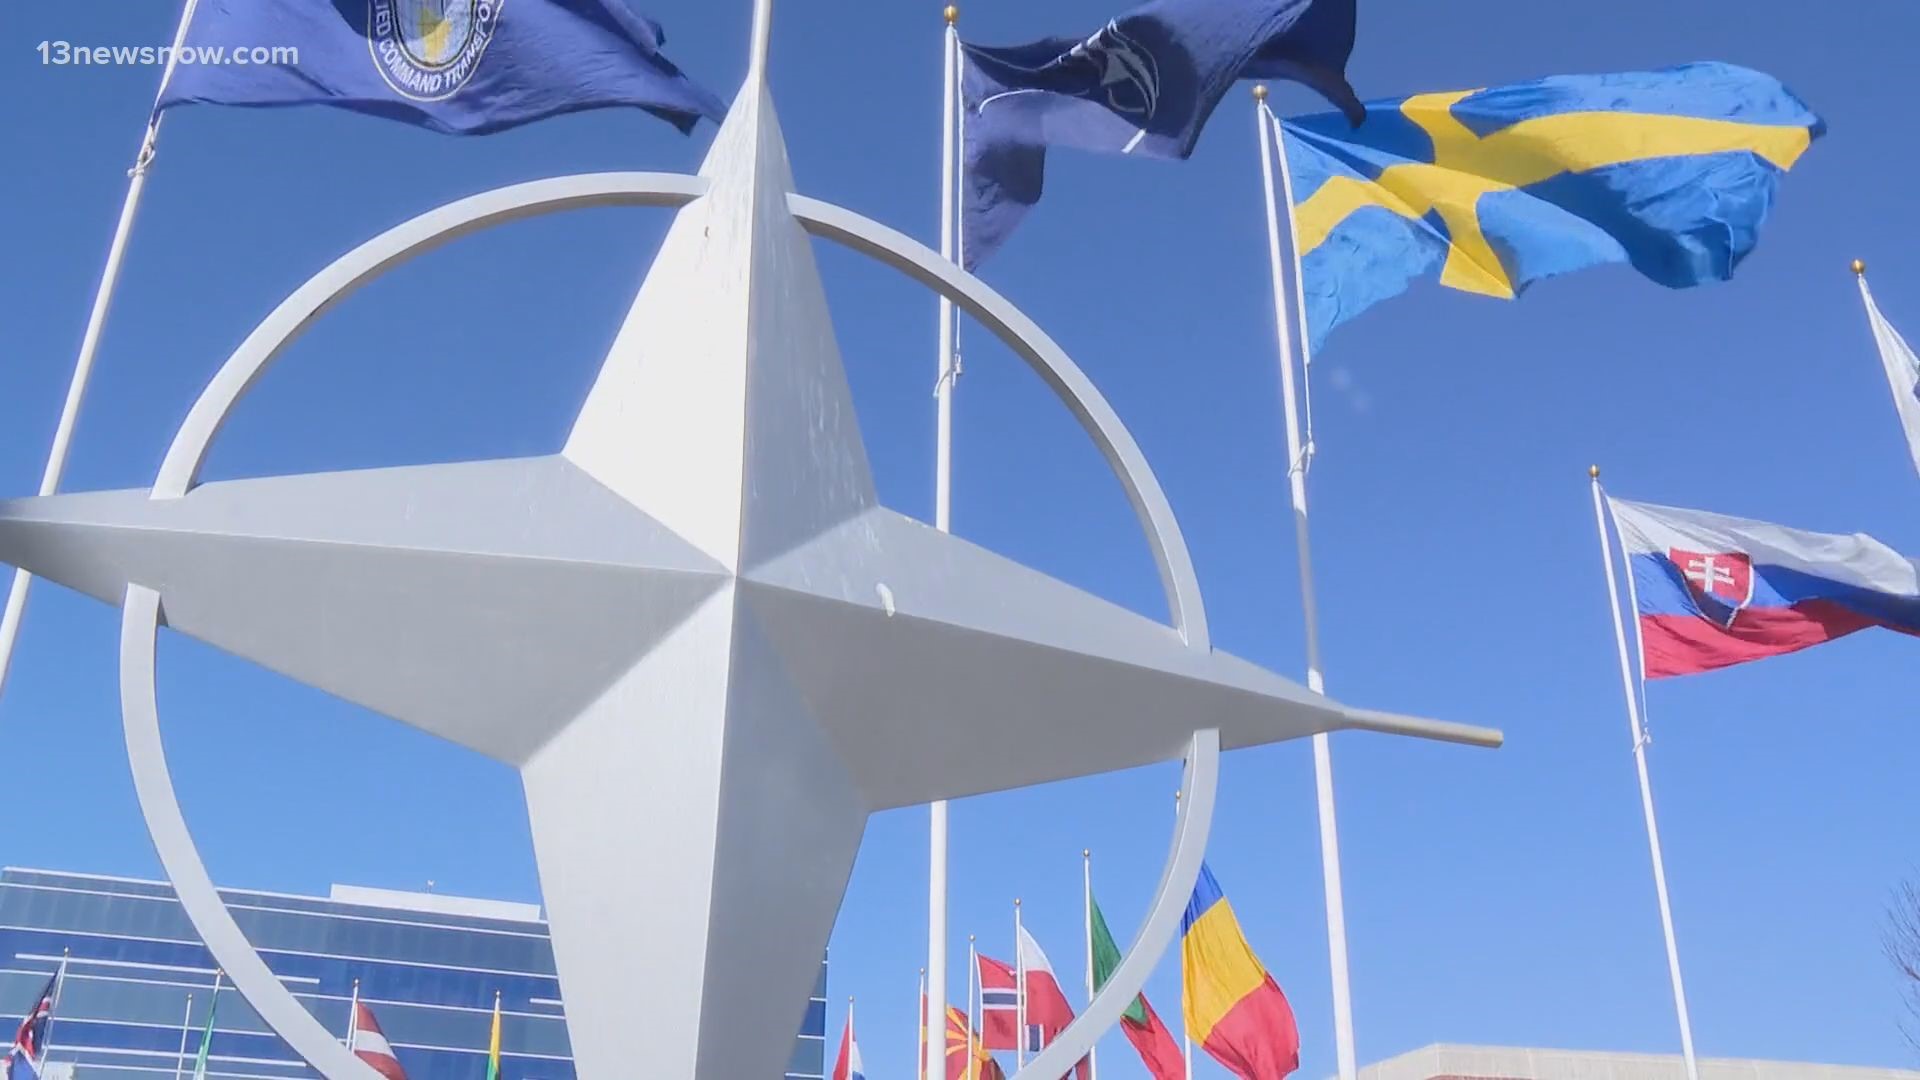 In ceremonies on both sides of the Atlantic today, flags were raised, formally signifying Sweden becoming NATO's 32nd member.